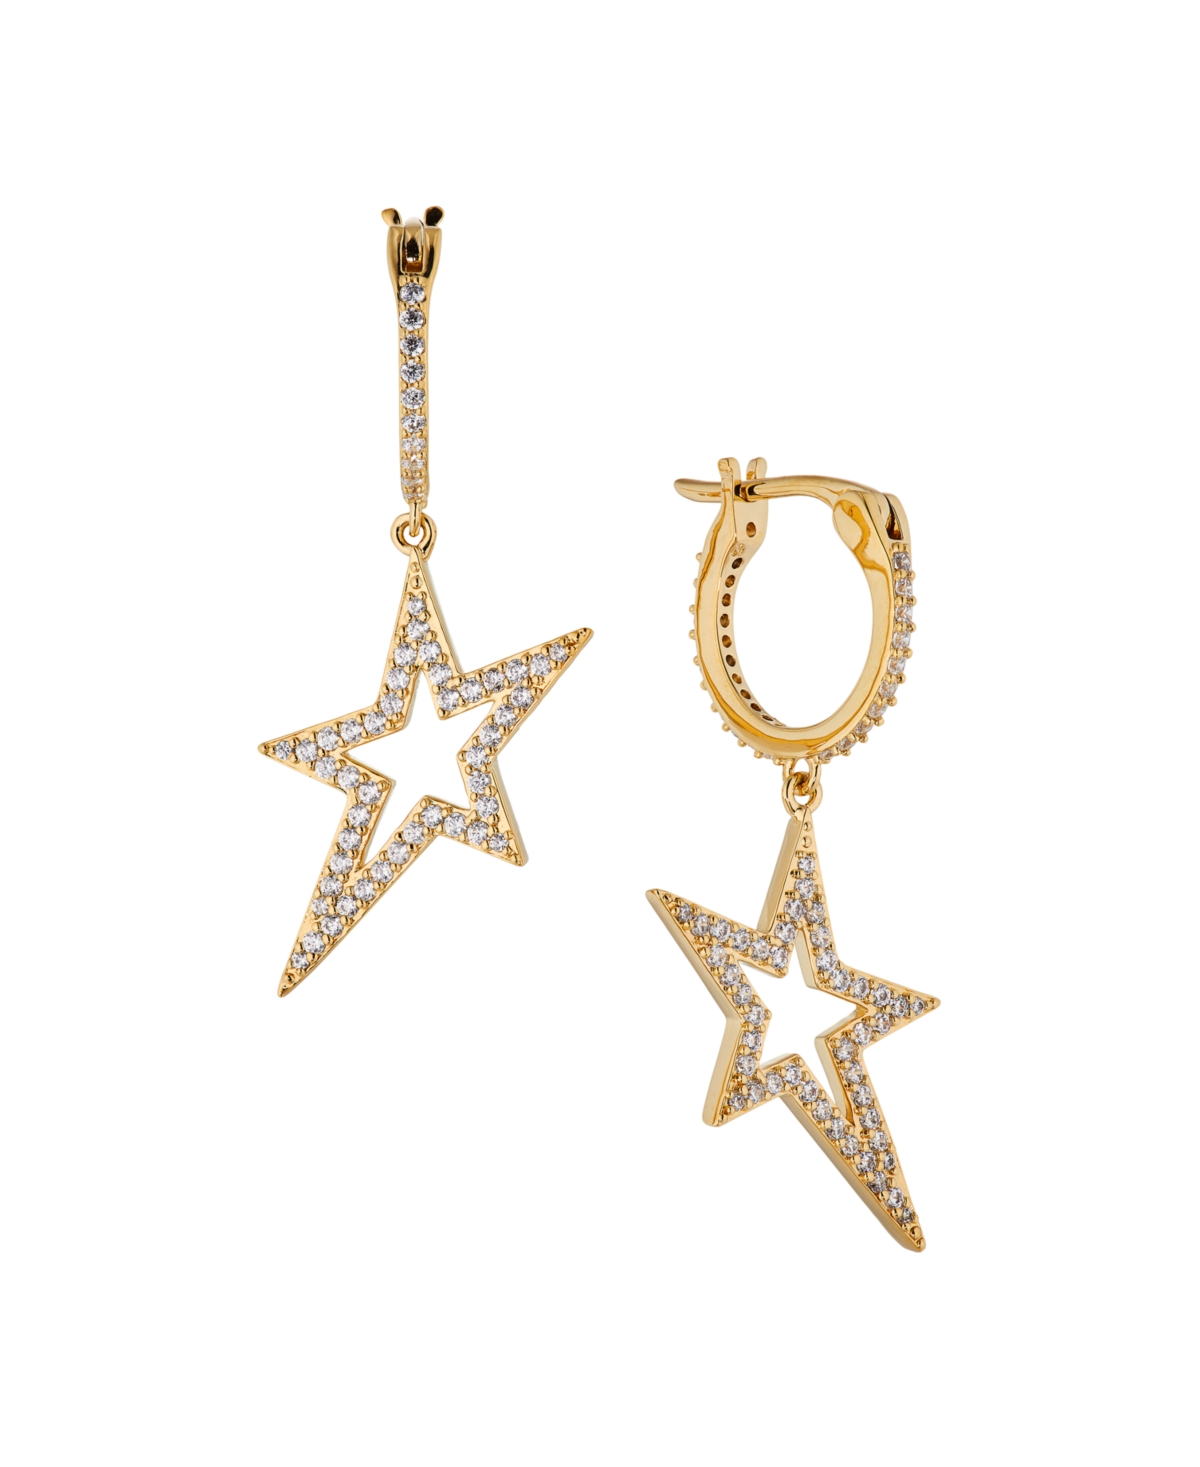 Ava Nadri Small Hoop With Star Drop Earring In Silver-tone Brass In K Gold Plated